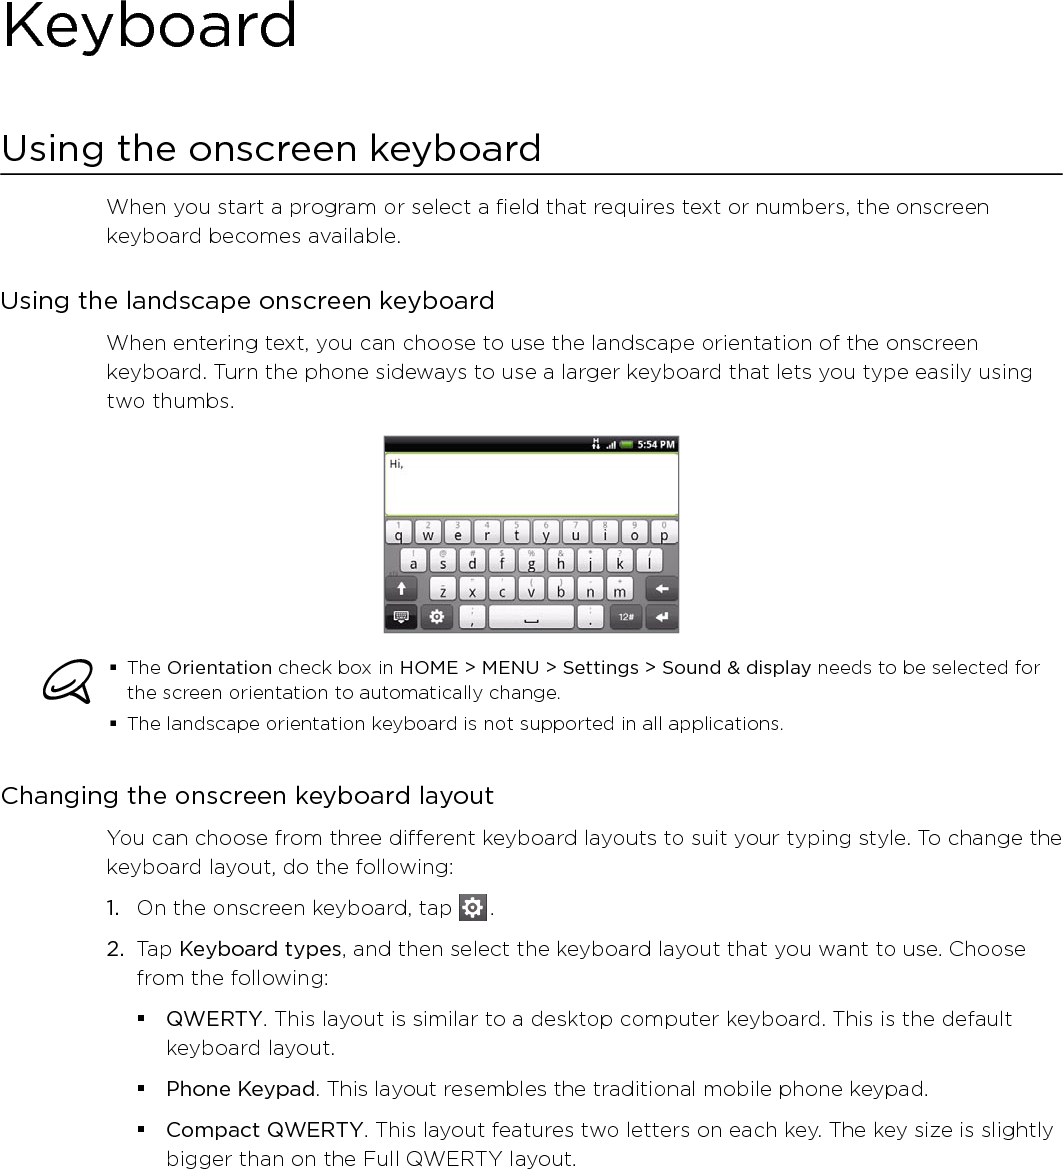 KeyboardUsing the onscreen keyboardWhen you start a program or select a field that requires text or numbers, the onscreen keyboard becomes available.Using the landscape onscreen keyboardWhen entering text, you can choose to use the landscape orientation of the onscreen keyboard. Turn the phone sideways to use a larger keyboard that lets you type easily using two thumbs. The Orientation check box in HOME &gt; MENU &gt; Settings &gt; Sound &amp; display needs to be selected for the screen orientation to automatically change.The landscape orientation keyboard is not supported in all applications. Changing the onscreen keyboard layoutYou can choose from three different keyboard layouts to suit your typing style. To change the keyboard layout, do the following:1.  On the onscreen keyboard, tap   .2.  Tap Keyboard types, and then select the keyboard layout that you want to use. Choose from the following:QWERTY. This layout is similar to a desktop computer keyboard. This is the default keyboard layout.Phone Keypad. This layout resembles the traditional mobile phone keypad.Compact QWERTY. This layout features two letters on each key. The key size is slightly bigger than on the Full QWERTY layout.